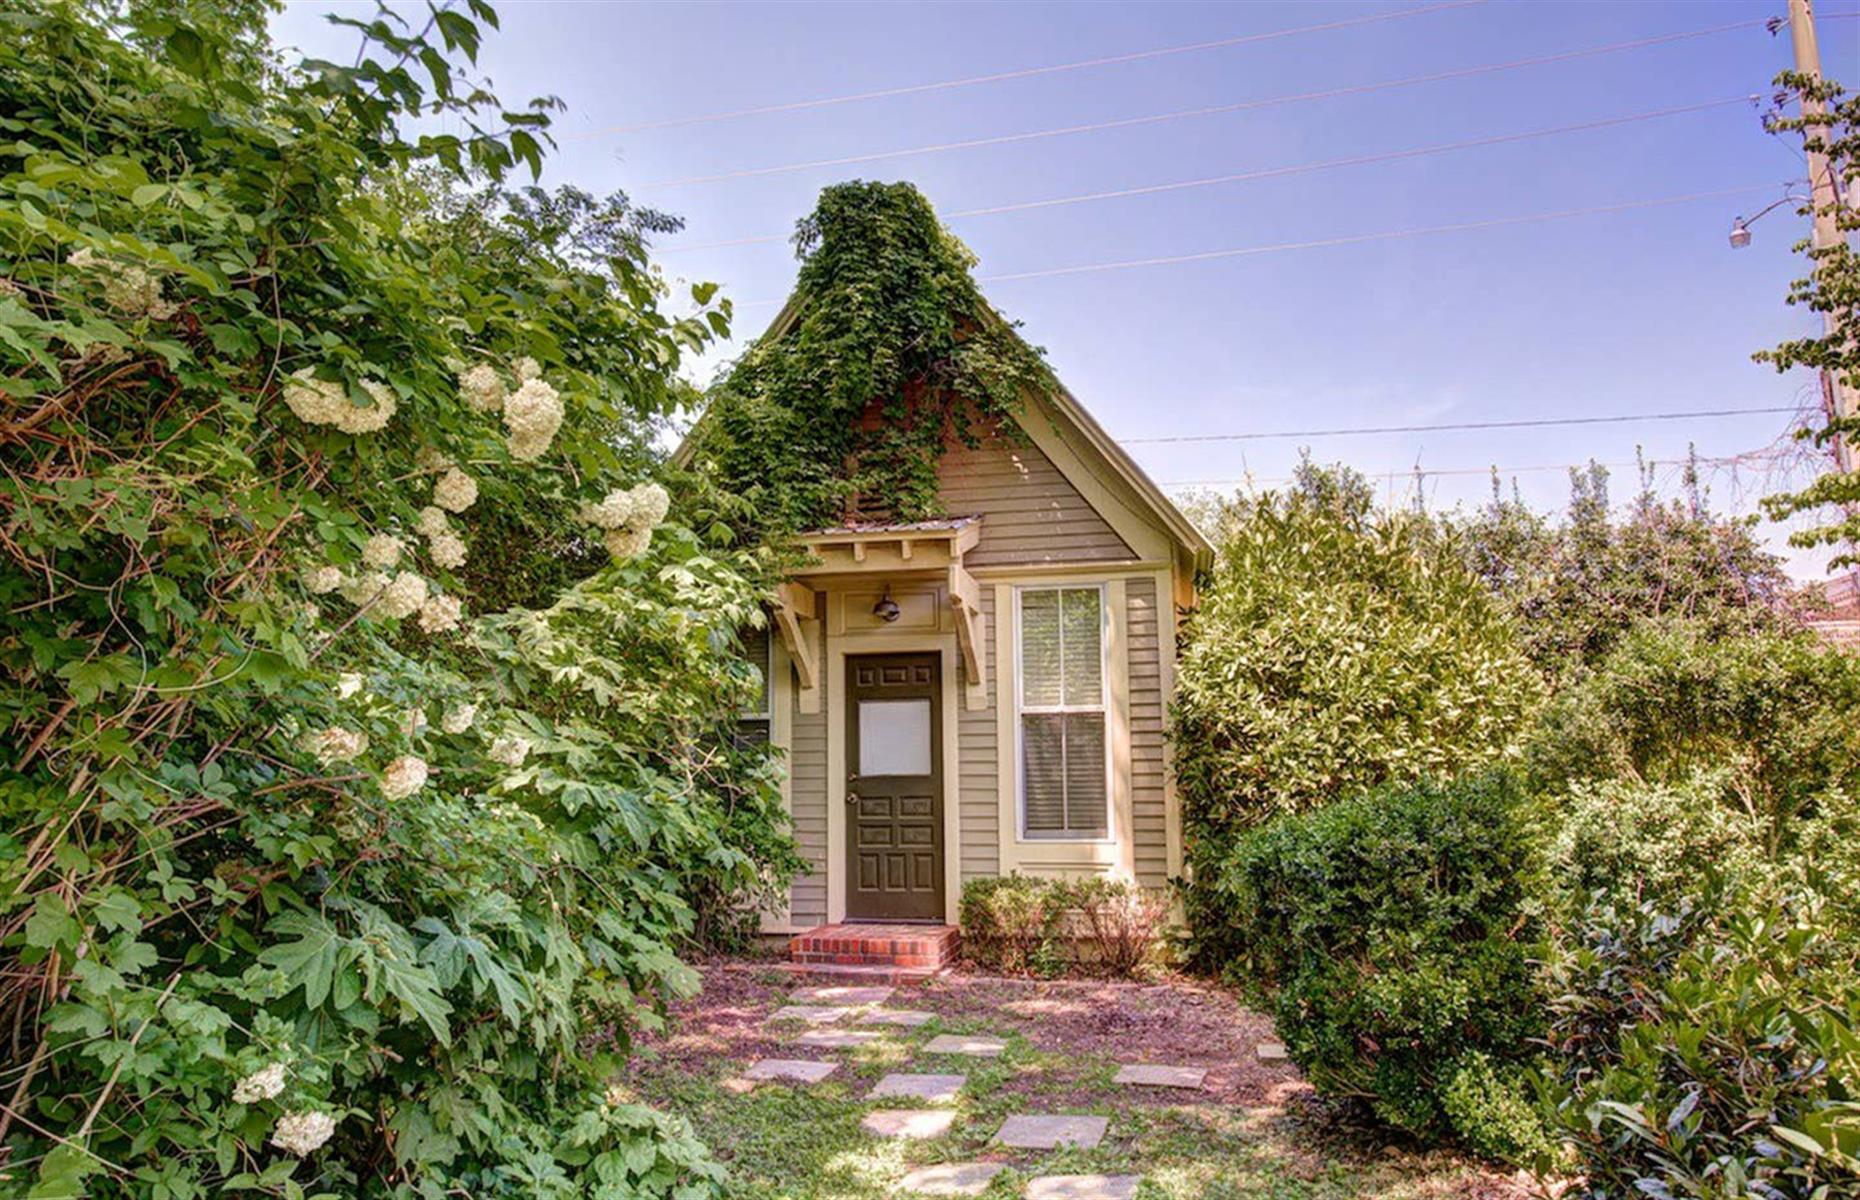 <p>Often named among the top Airbnbs in Alabama, <a href="https://www.airbnb.co.uk/rooms/1004344">this stunning cottage</a> also happens to be $105 a night. The 100-year-old hideaway, just around 15 miles (24km) from Huntsville, is located within the grounds of The Winchester Manor and has many charming details, like antique brick floors. There's plenty of history here too, as the cottage used to be a post office, then served as a doctor's office, and even functioned as a jail. The one-bedroom, open space has a breakfast nook and a kitchen area, as well as a bathroom with a tub and a hot tub outside.</p>